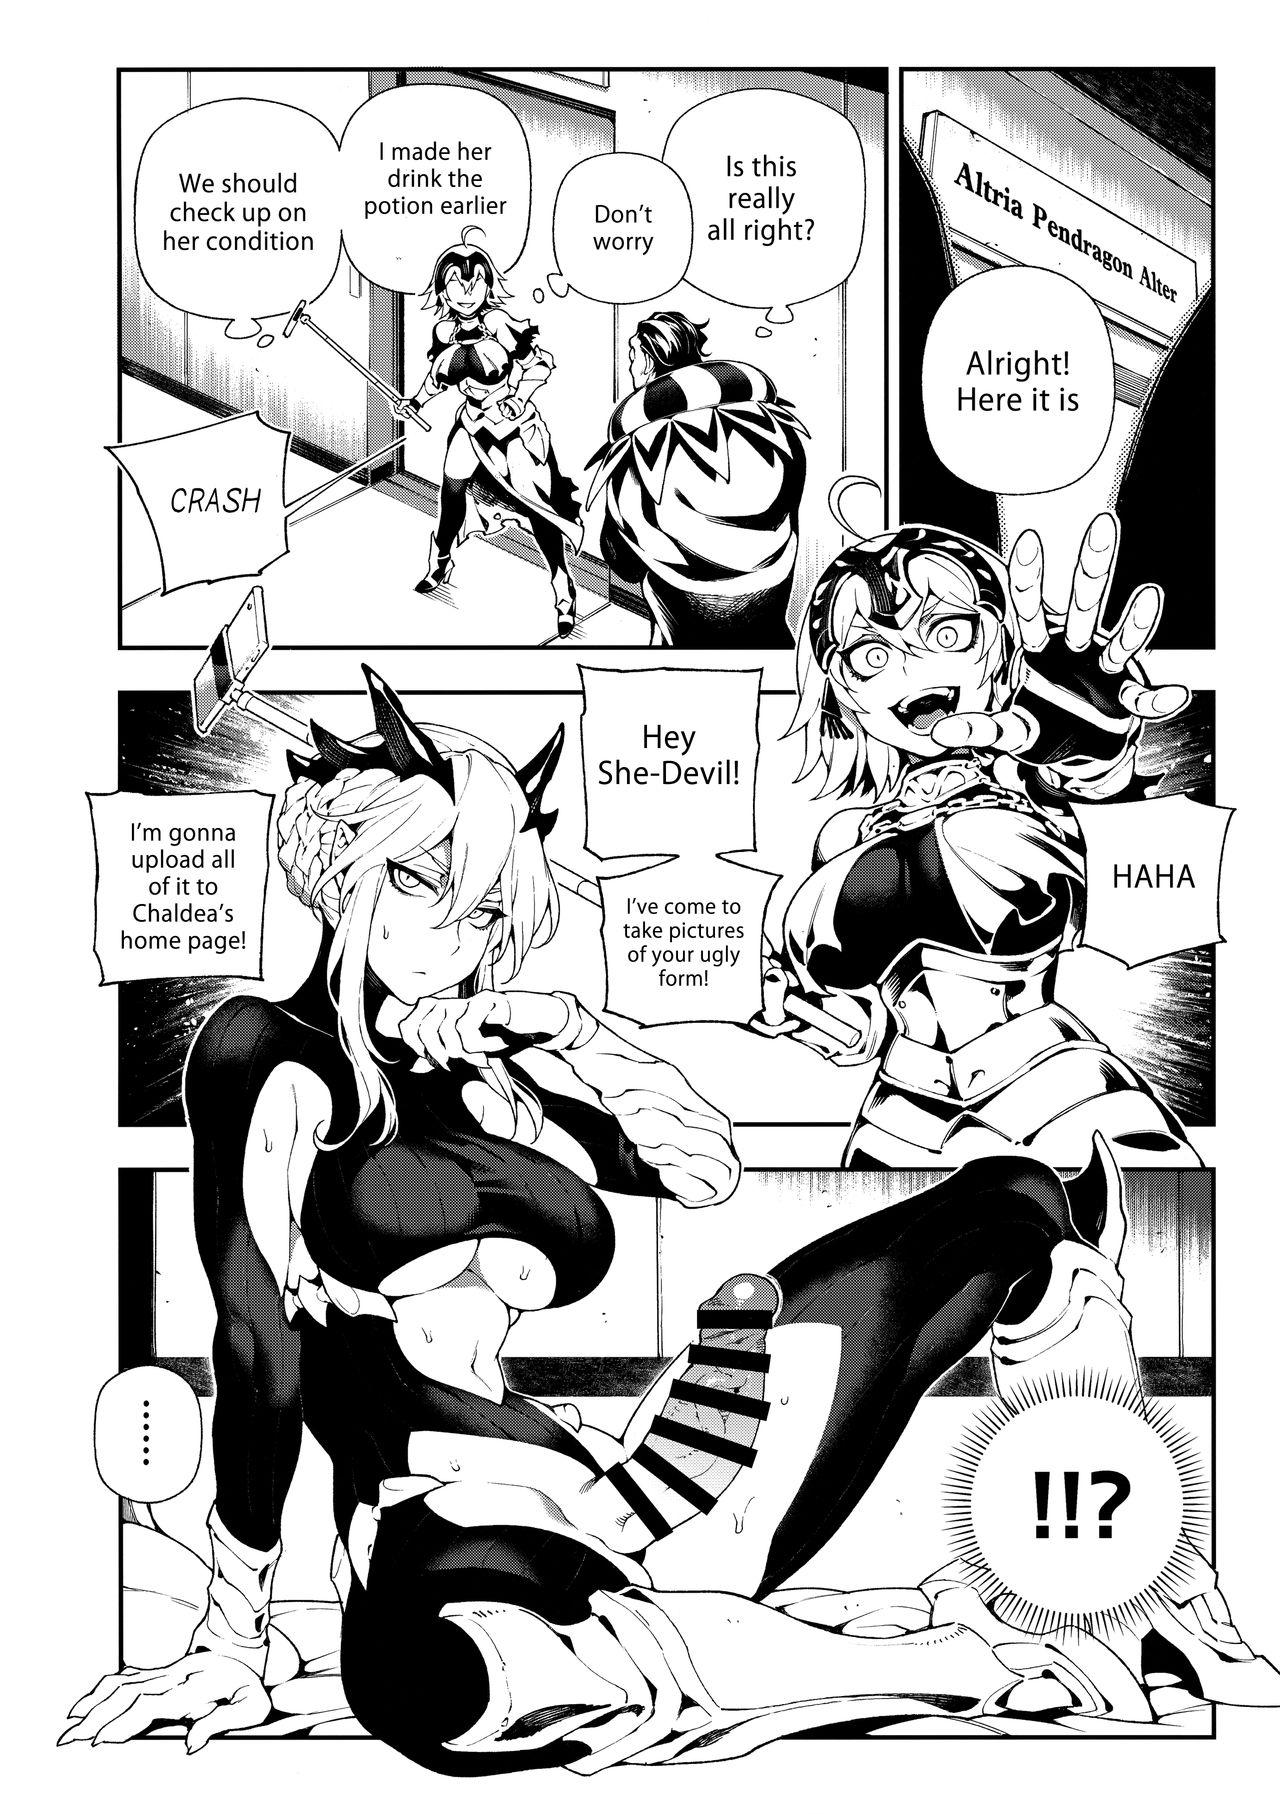 Sloppy Blow Job CHALDEA MANIA - Jeanne Alter - Fate grand order Magrinha - Page 5